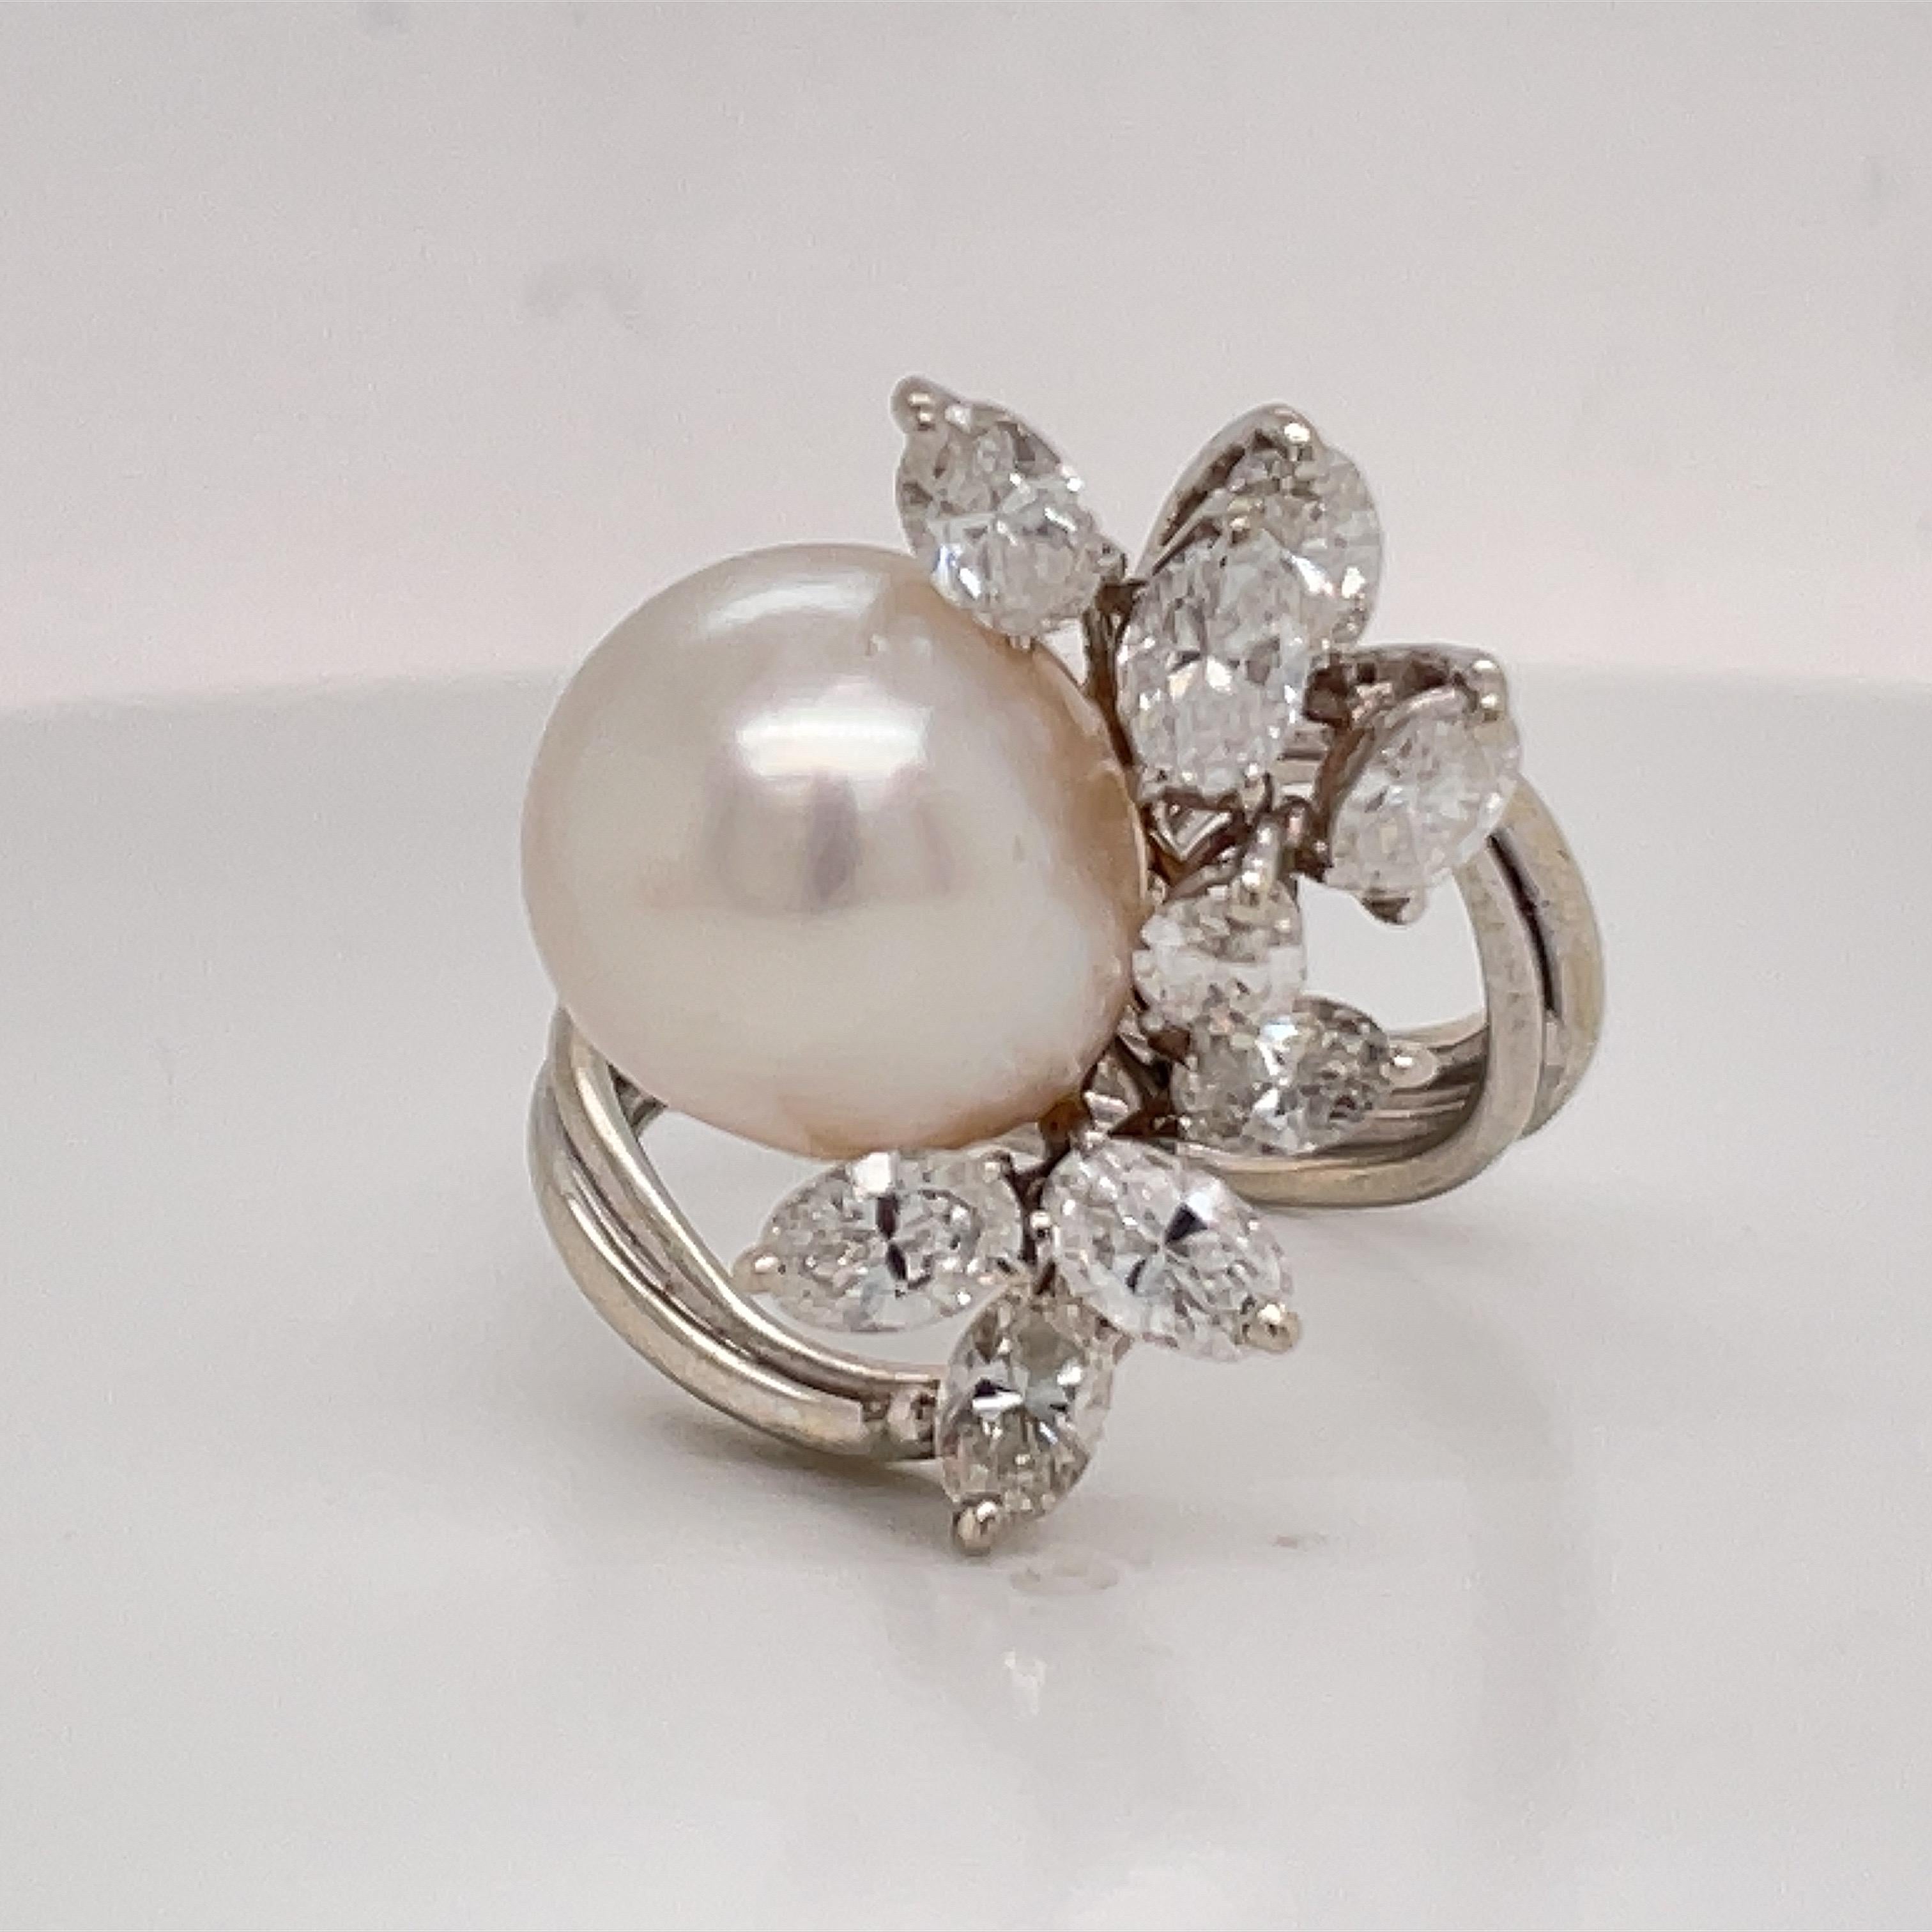 Oval Cut Australian South Sea Pearl Diamond Cluster Cocktail Ring 2 Carats 14K White Gold